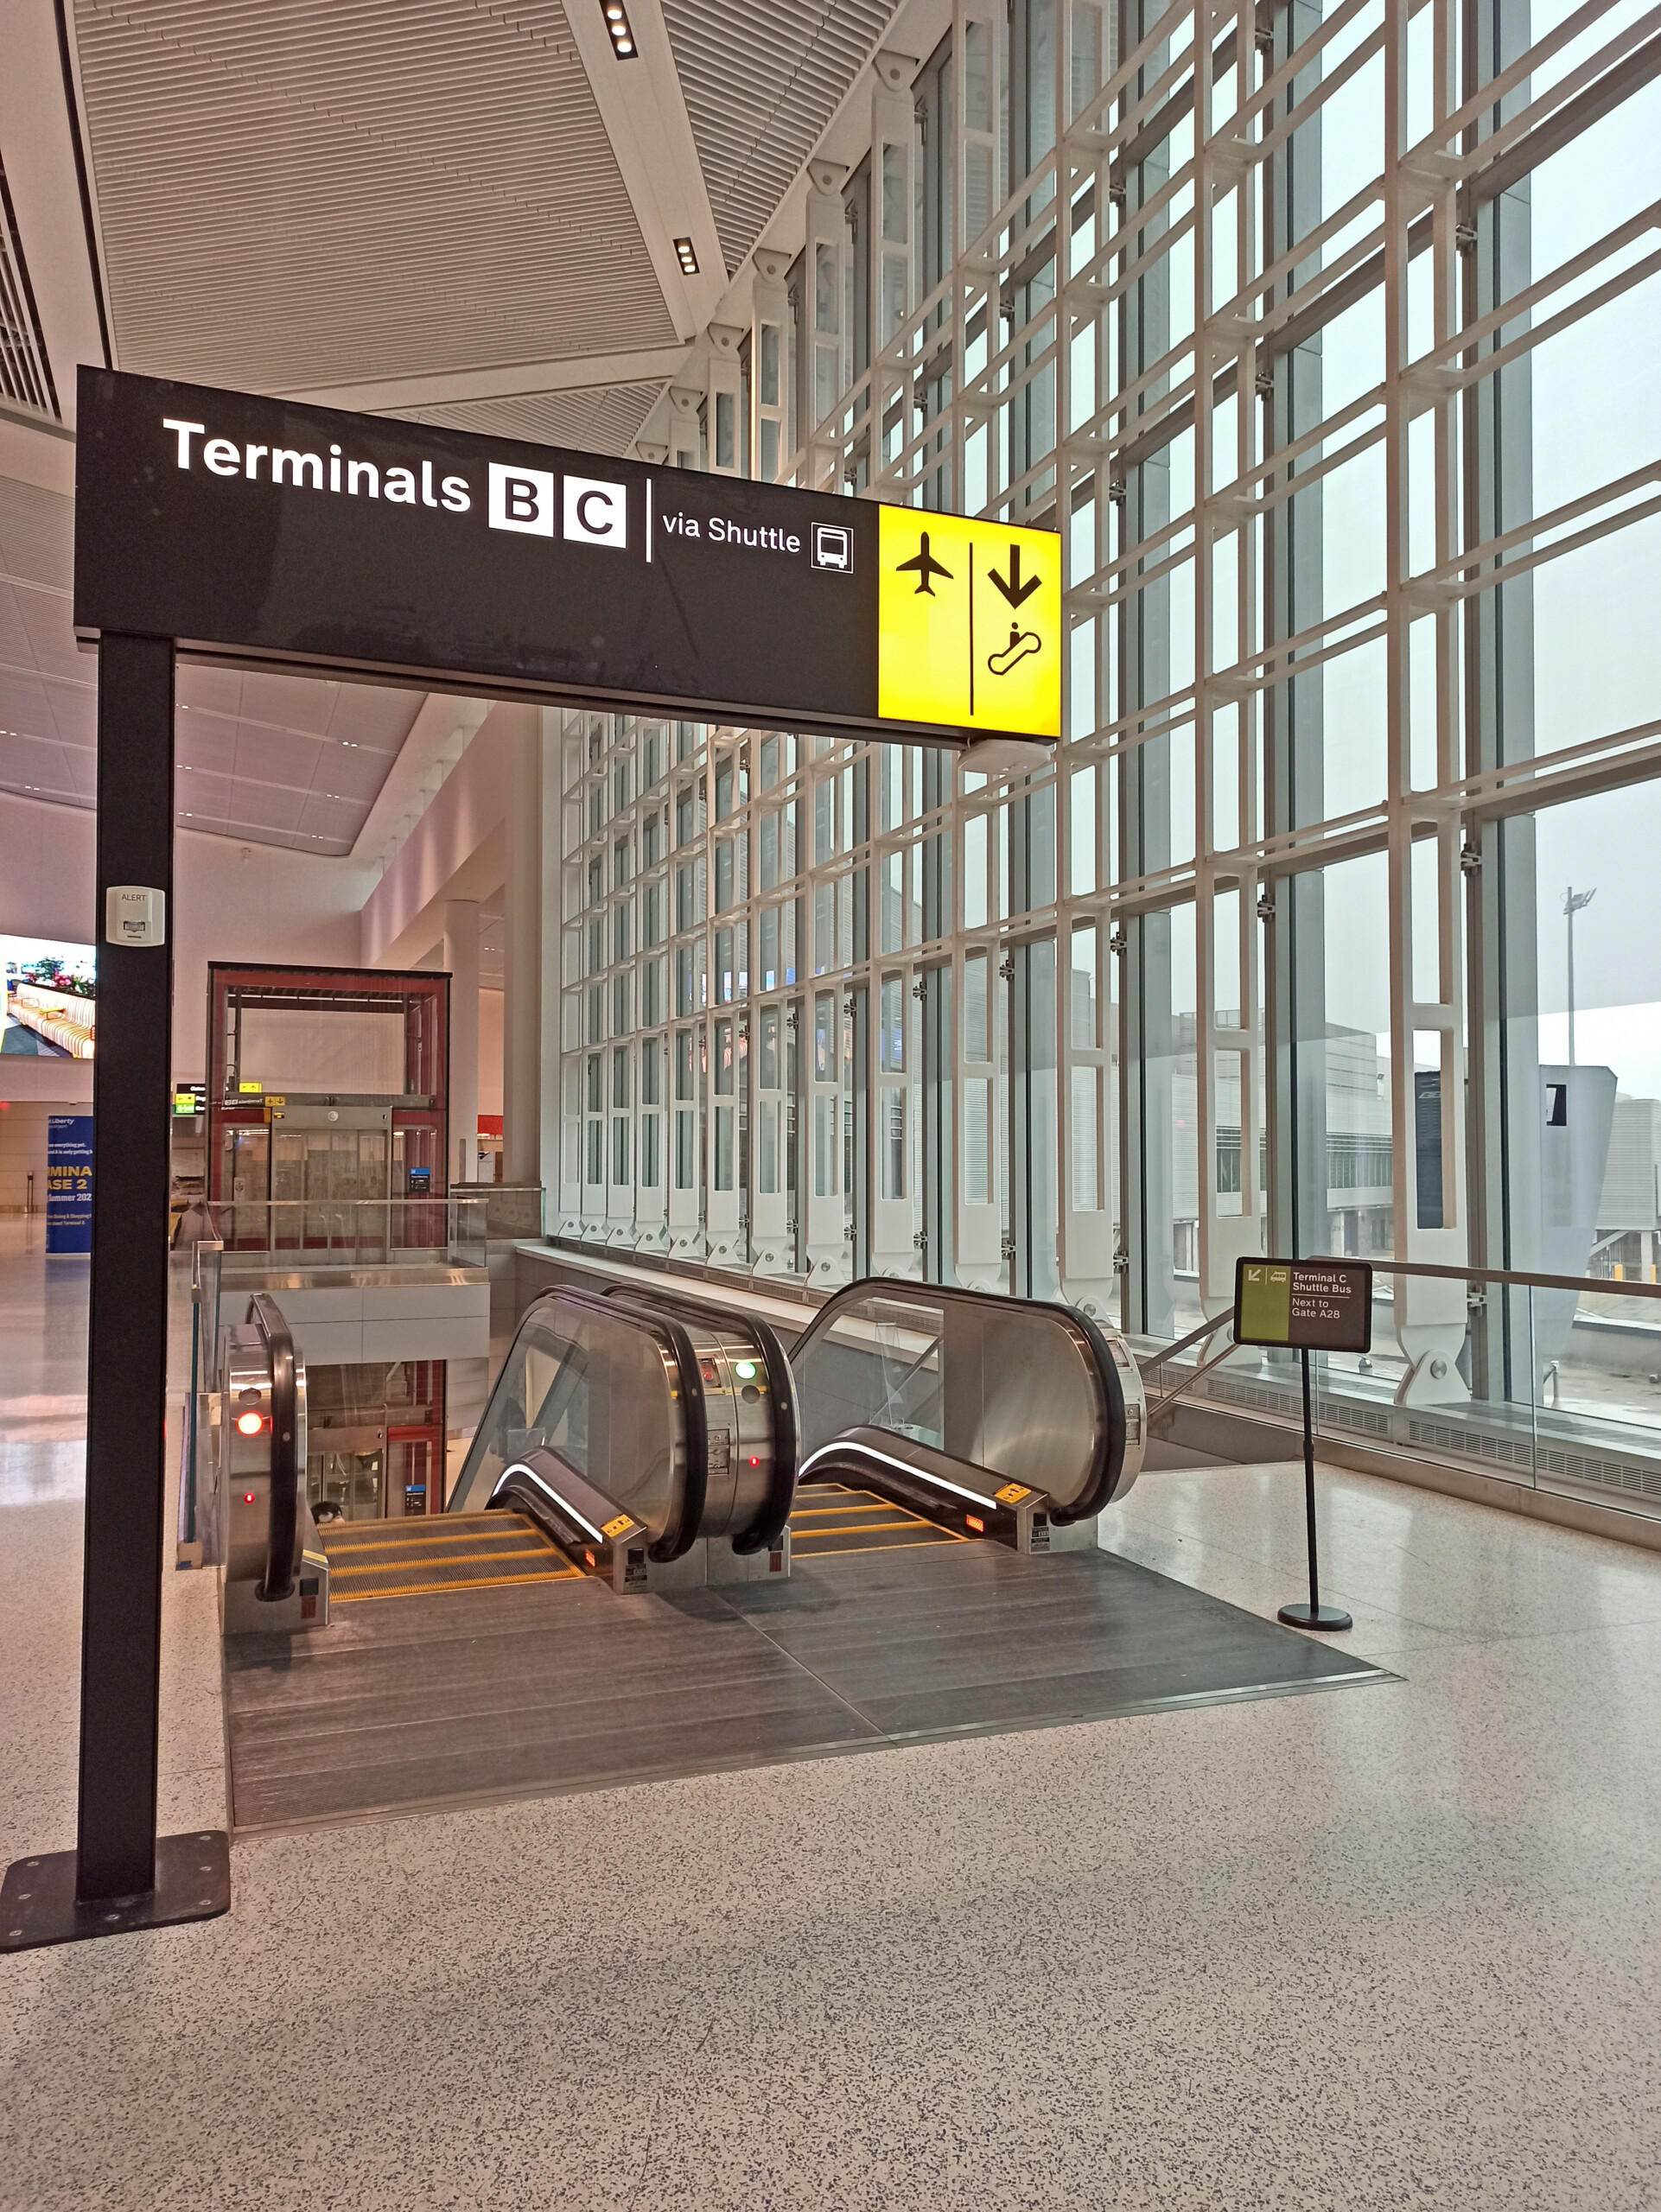 Post-security transfers to Terminals B & C, EWR